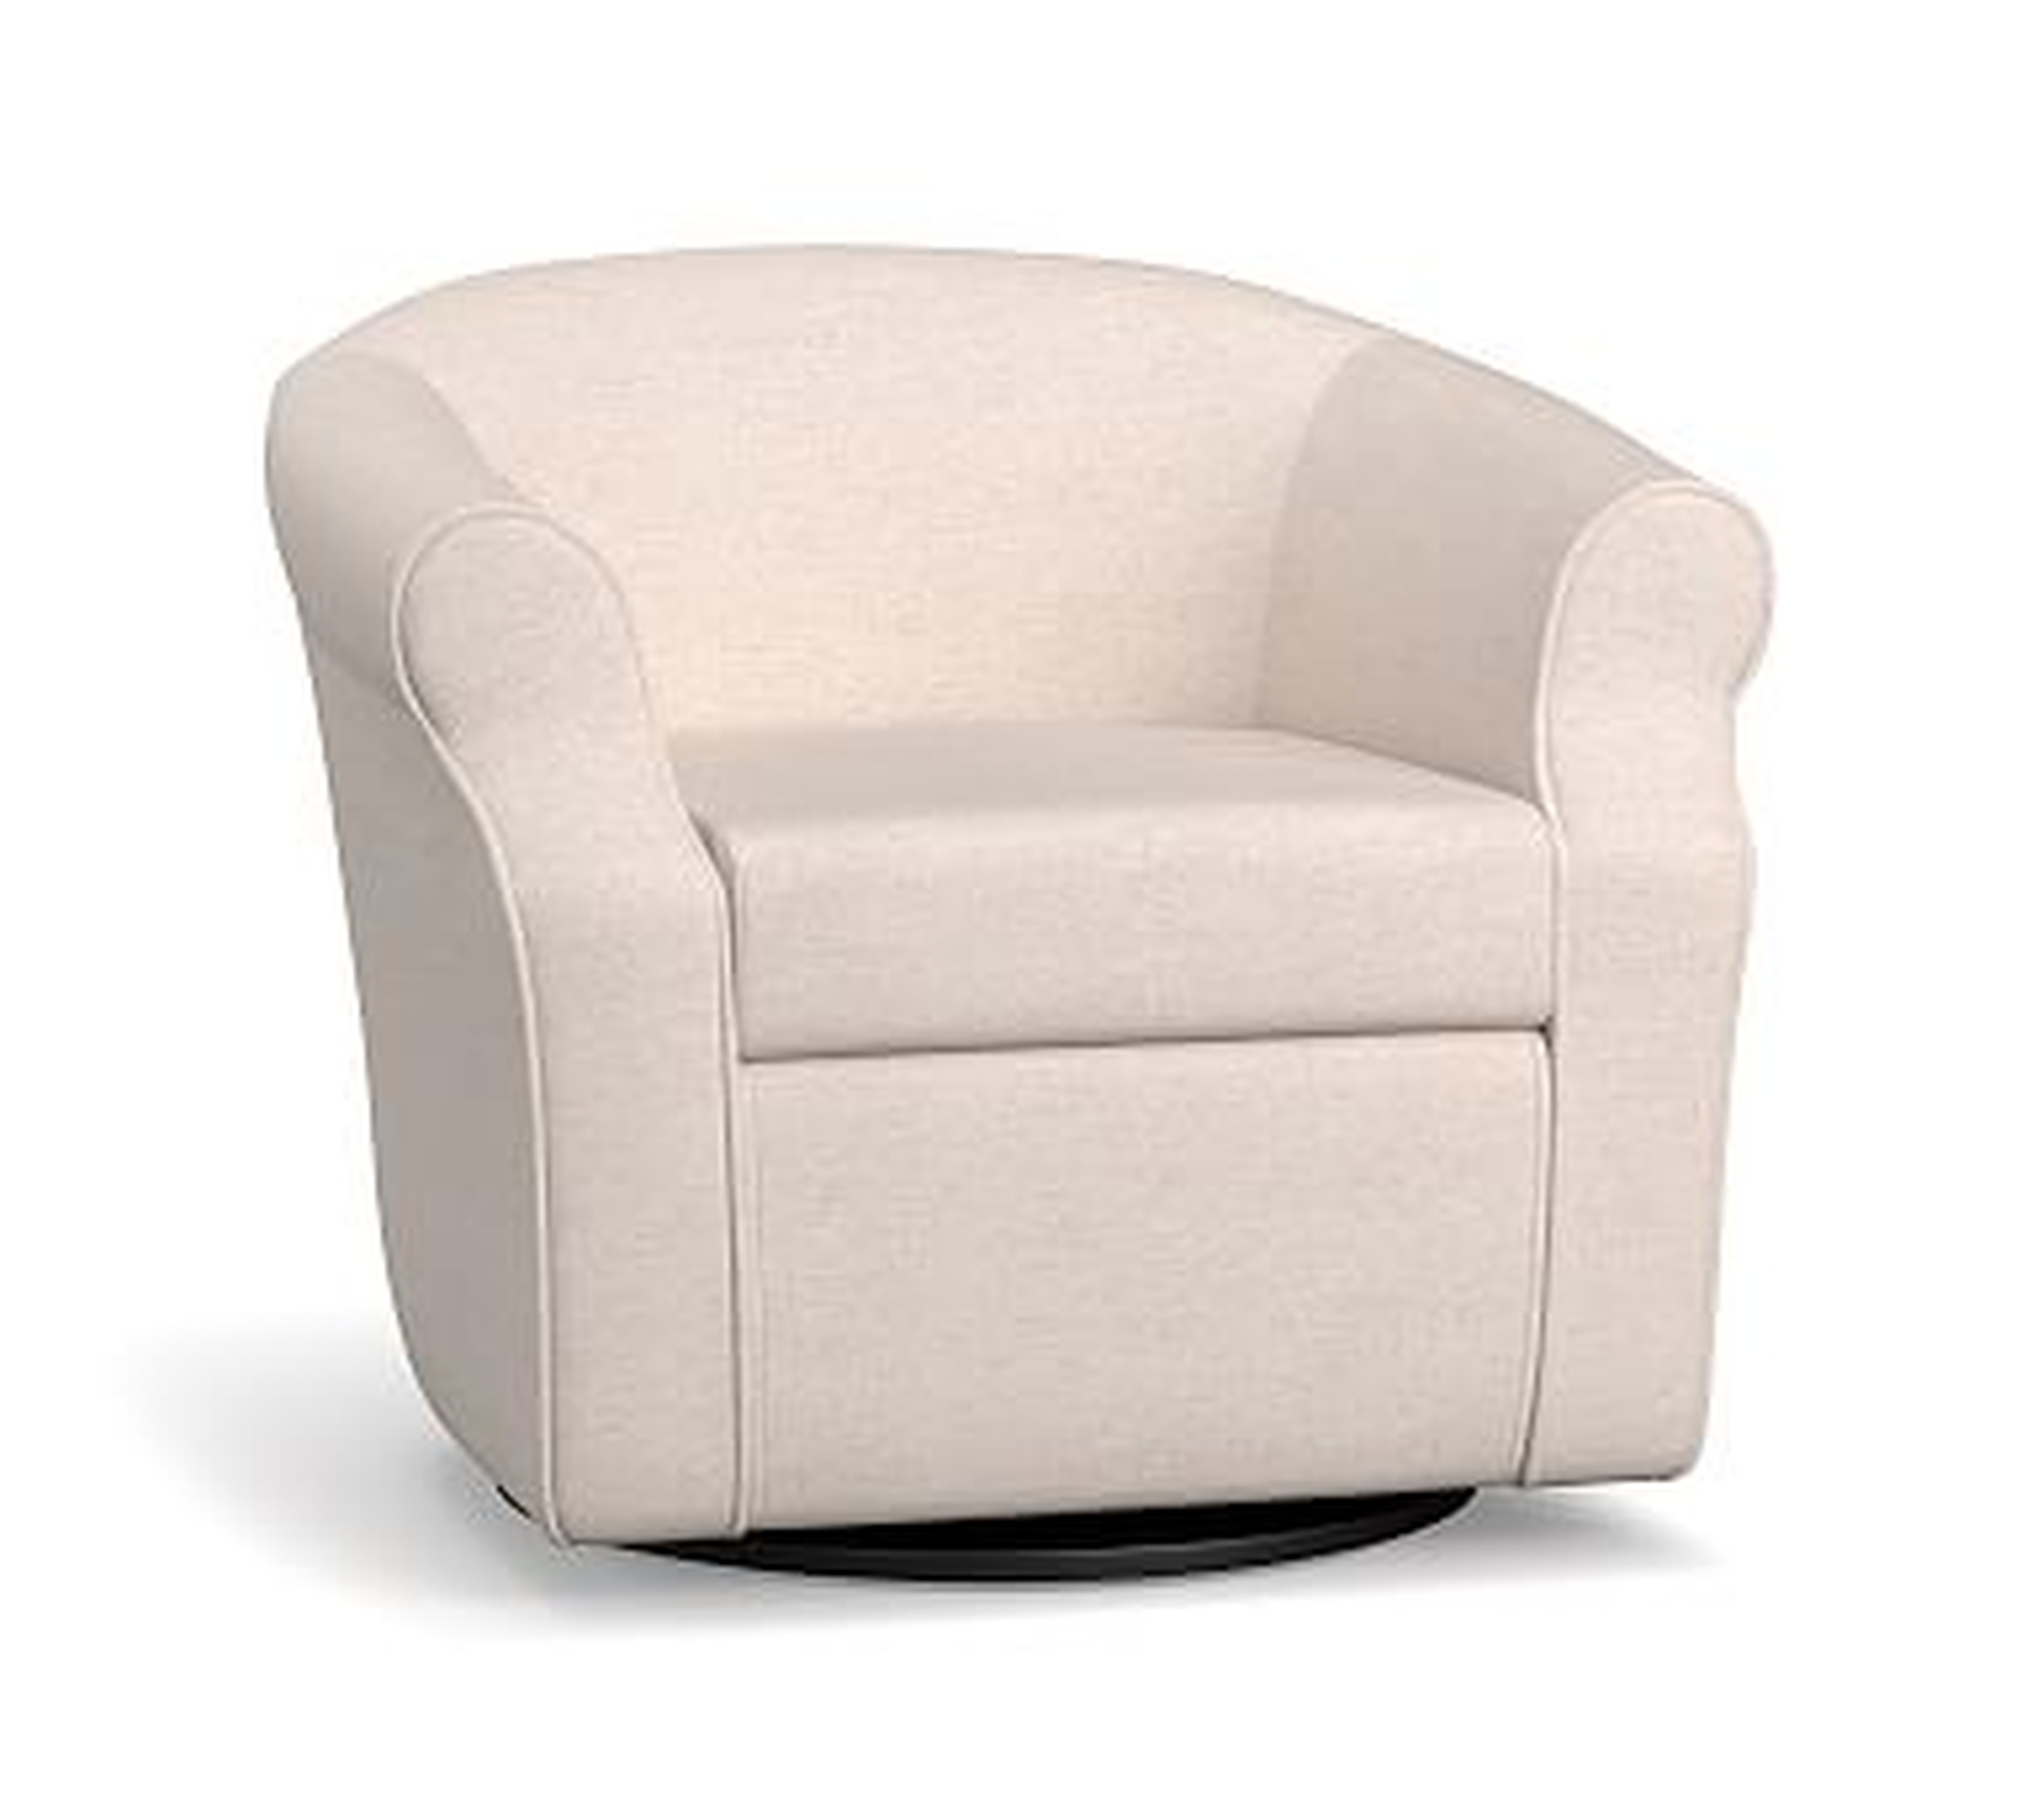 SoMa Lyndon Upholstered Swivel Armchair, Polyester Wrapped Cushions, Performance Everydaylinen(TM) by Crypton(R) Home Oatmeal - Pottery Barn